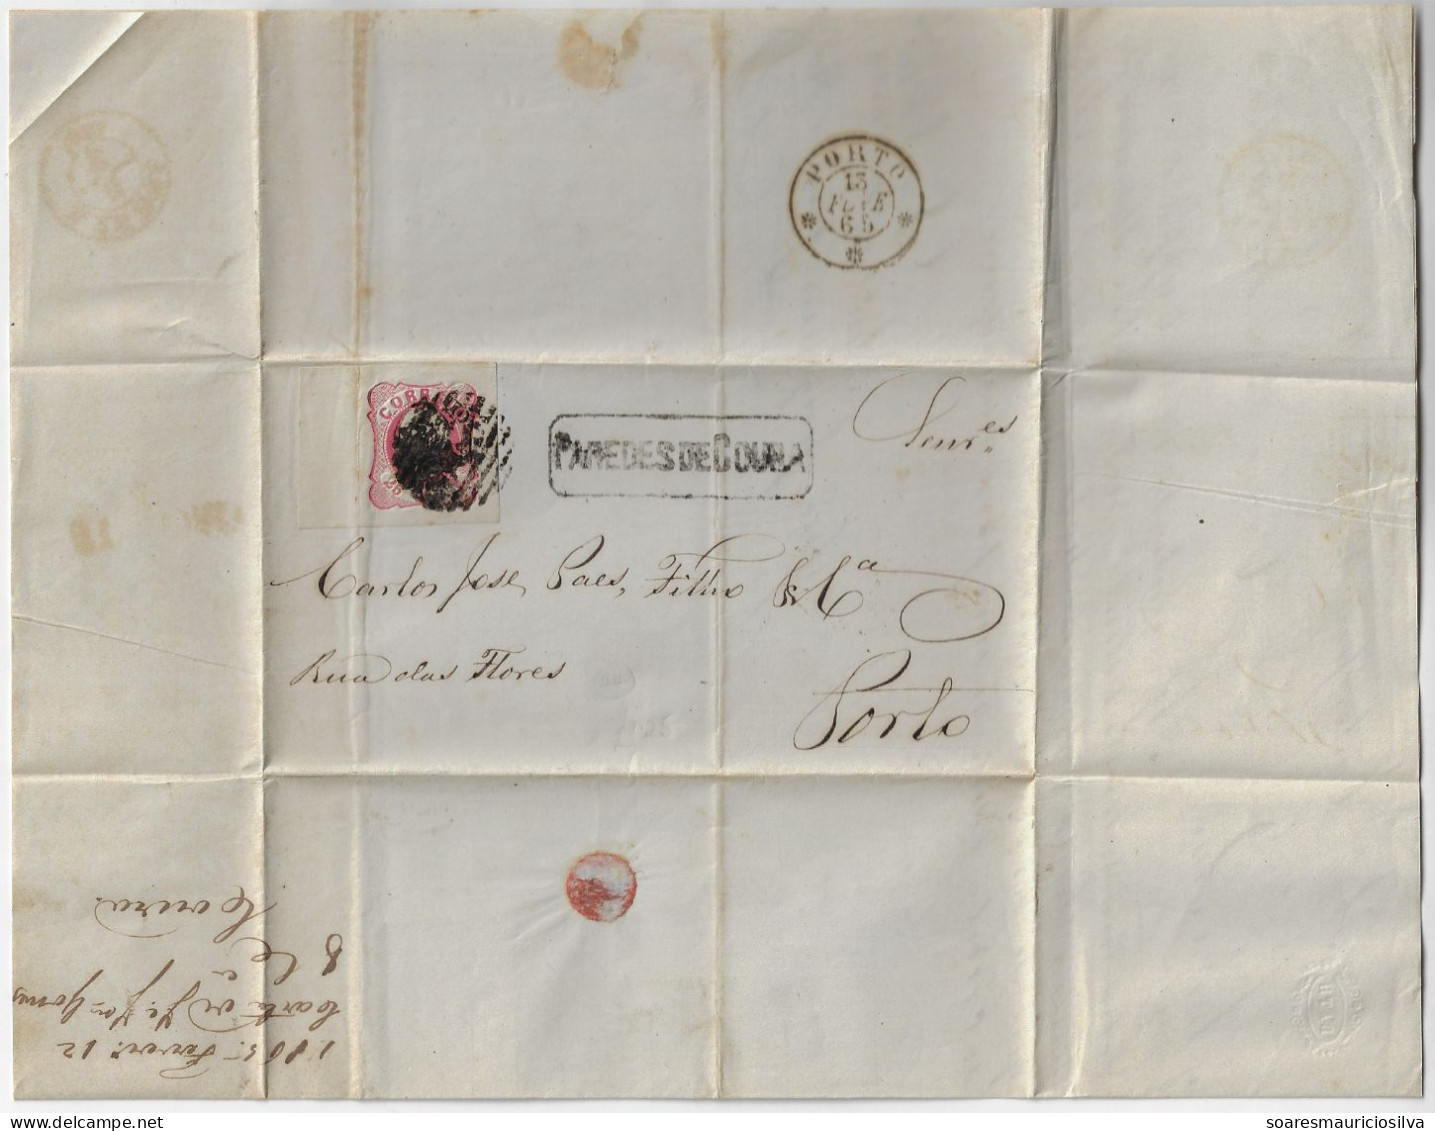 Portugal 1865 Complete Fold Cover Sent From Paredes De Coura To Porto Stamp King Luis I 25 Reis - Storia Postale